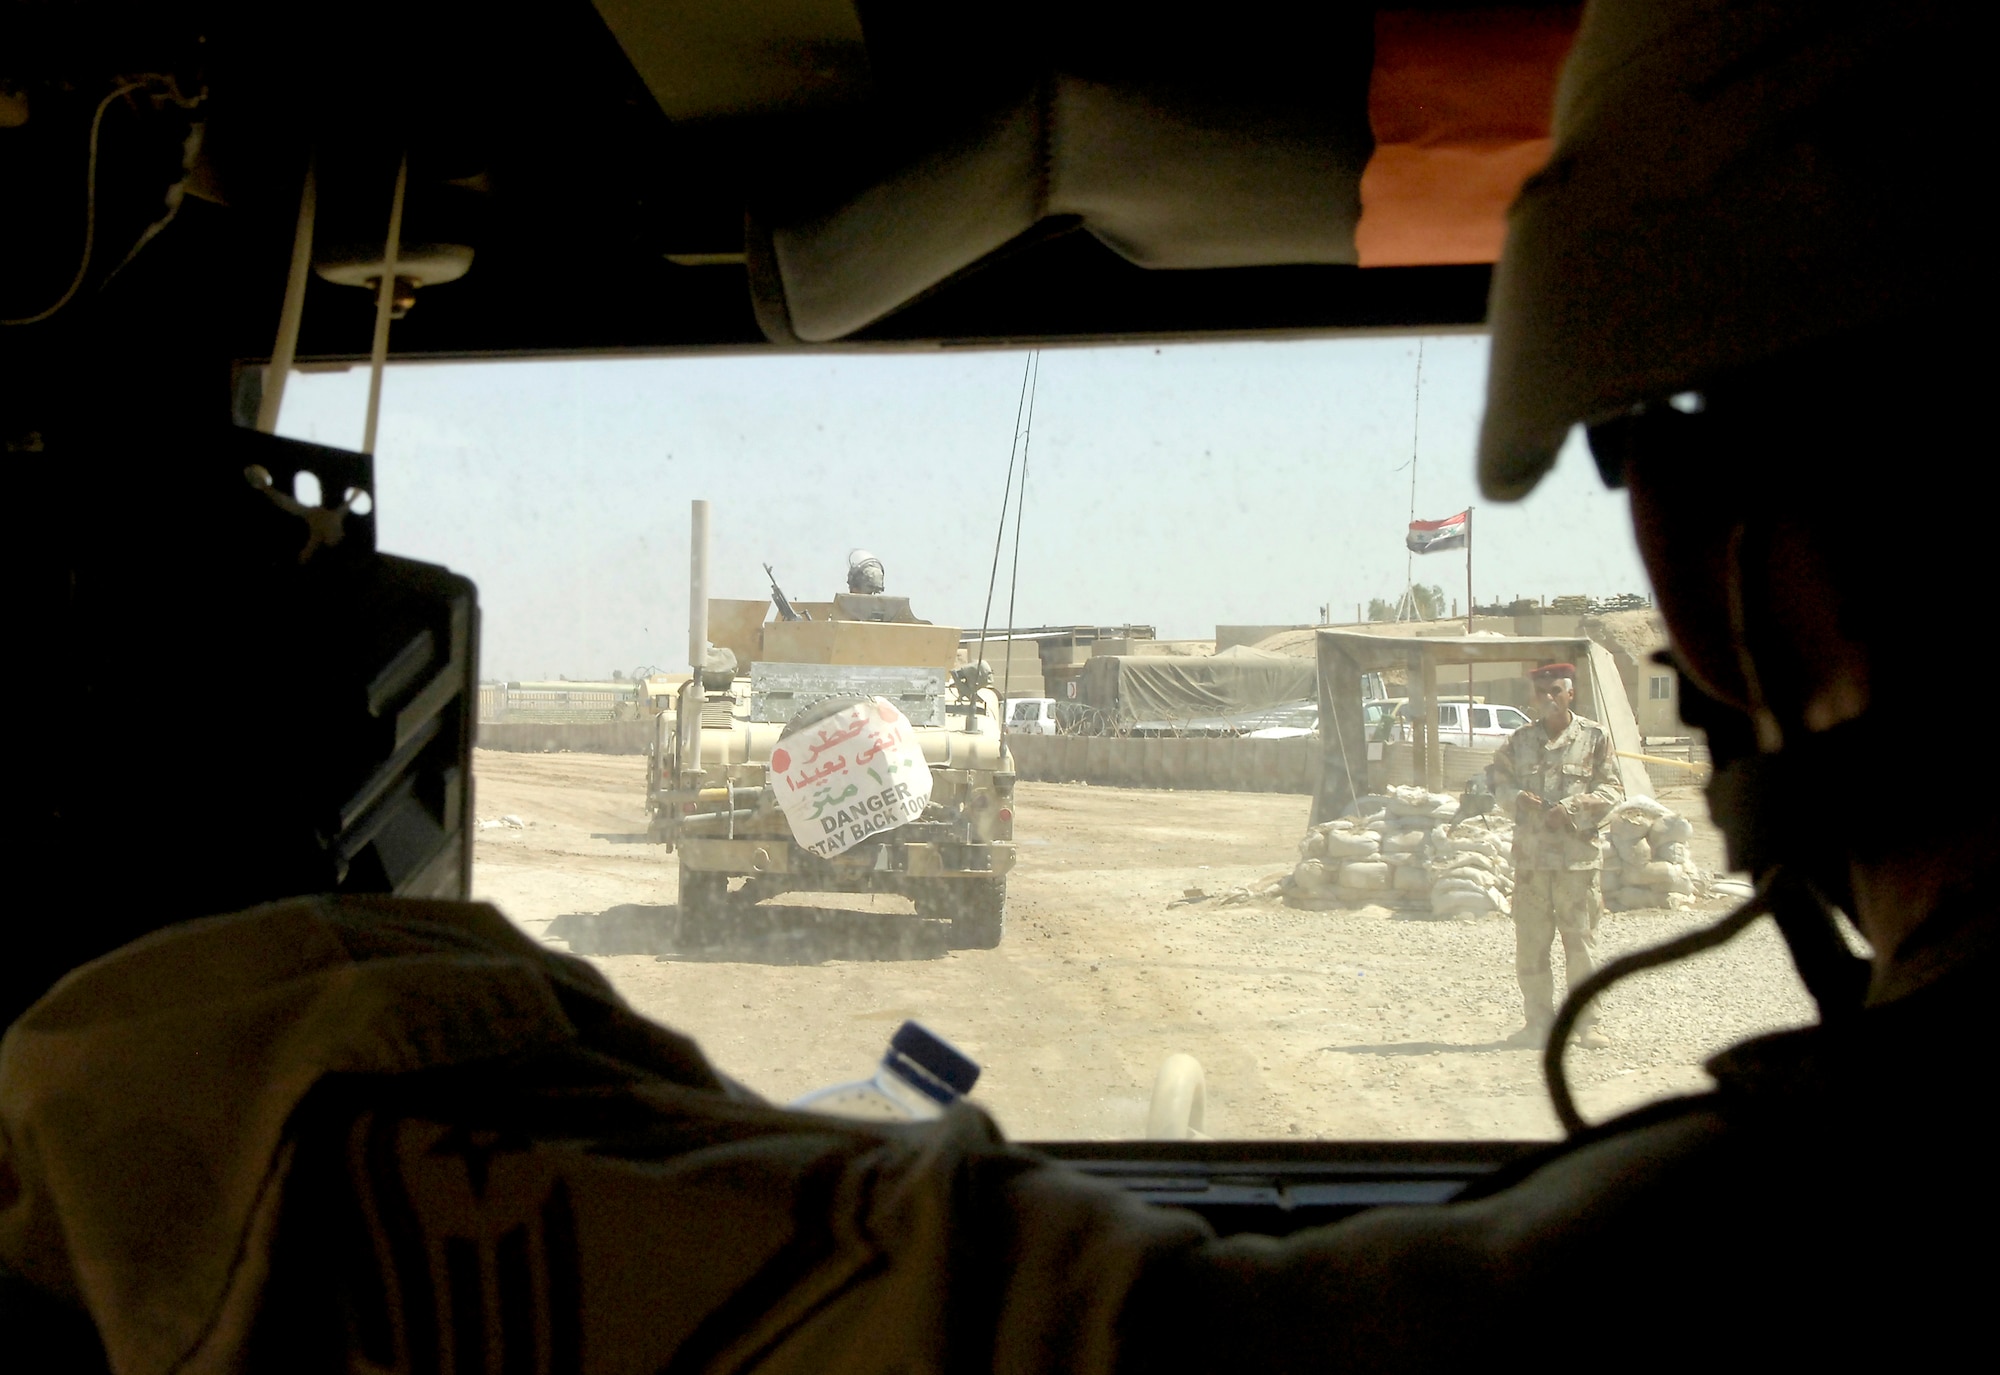 Master Sgt. Tony Pesson observes the operations of the 1st Iraqi Army Division/Iraqi Intervention Forces, as his convoy enters the base on Thursday, May 25, 2006.  Sergeant Pesson is the NCO in charge of Air Force Base Defense Unit Team 3602, which advises and trains the Iraqi Army on base defense procedures. (U.S. Air Force photo/Senior Airman Brian Ferguson)

